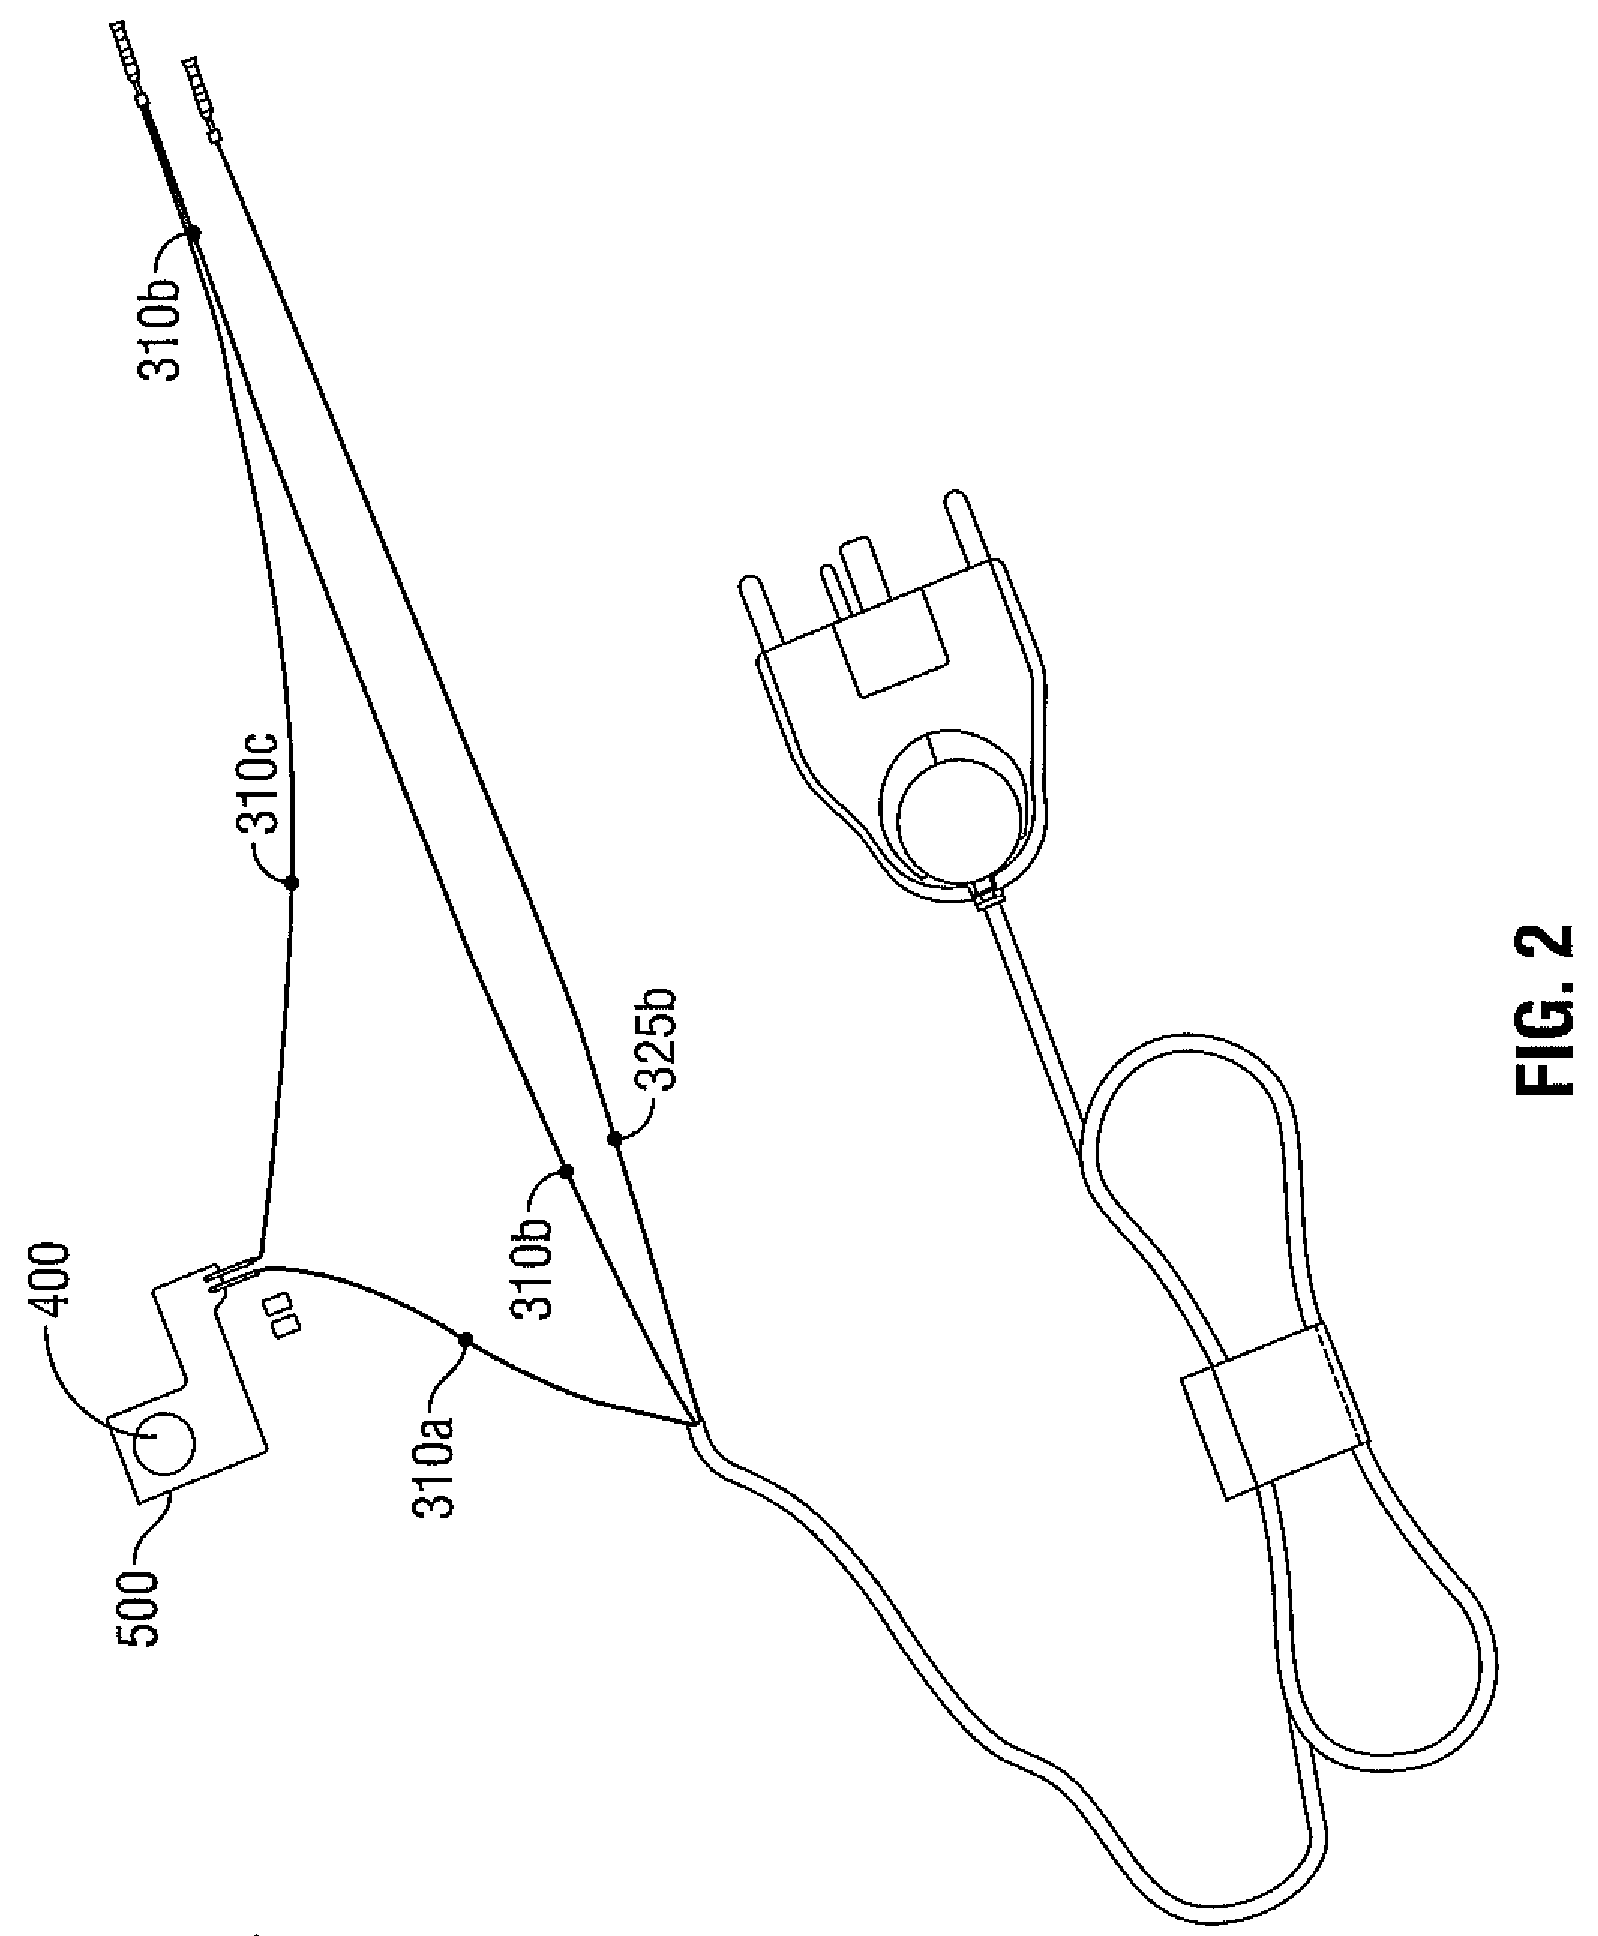 Apparatus, system, and method for performing an electrosurgical procedure